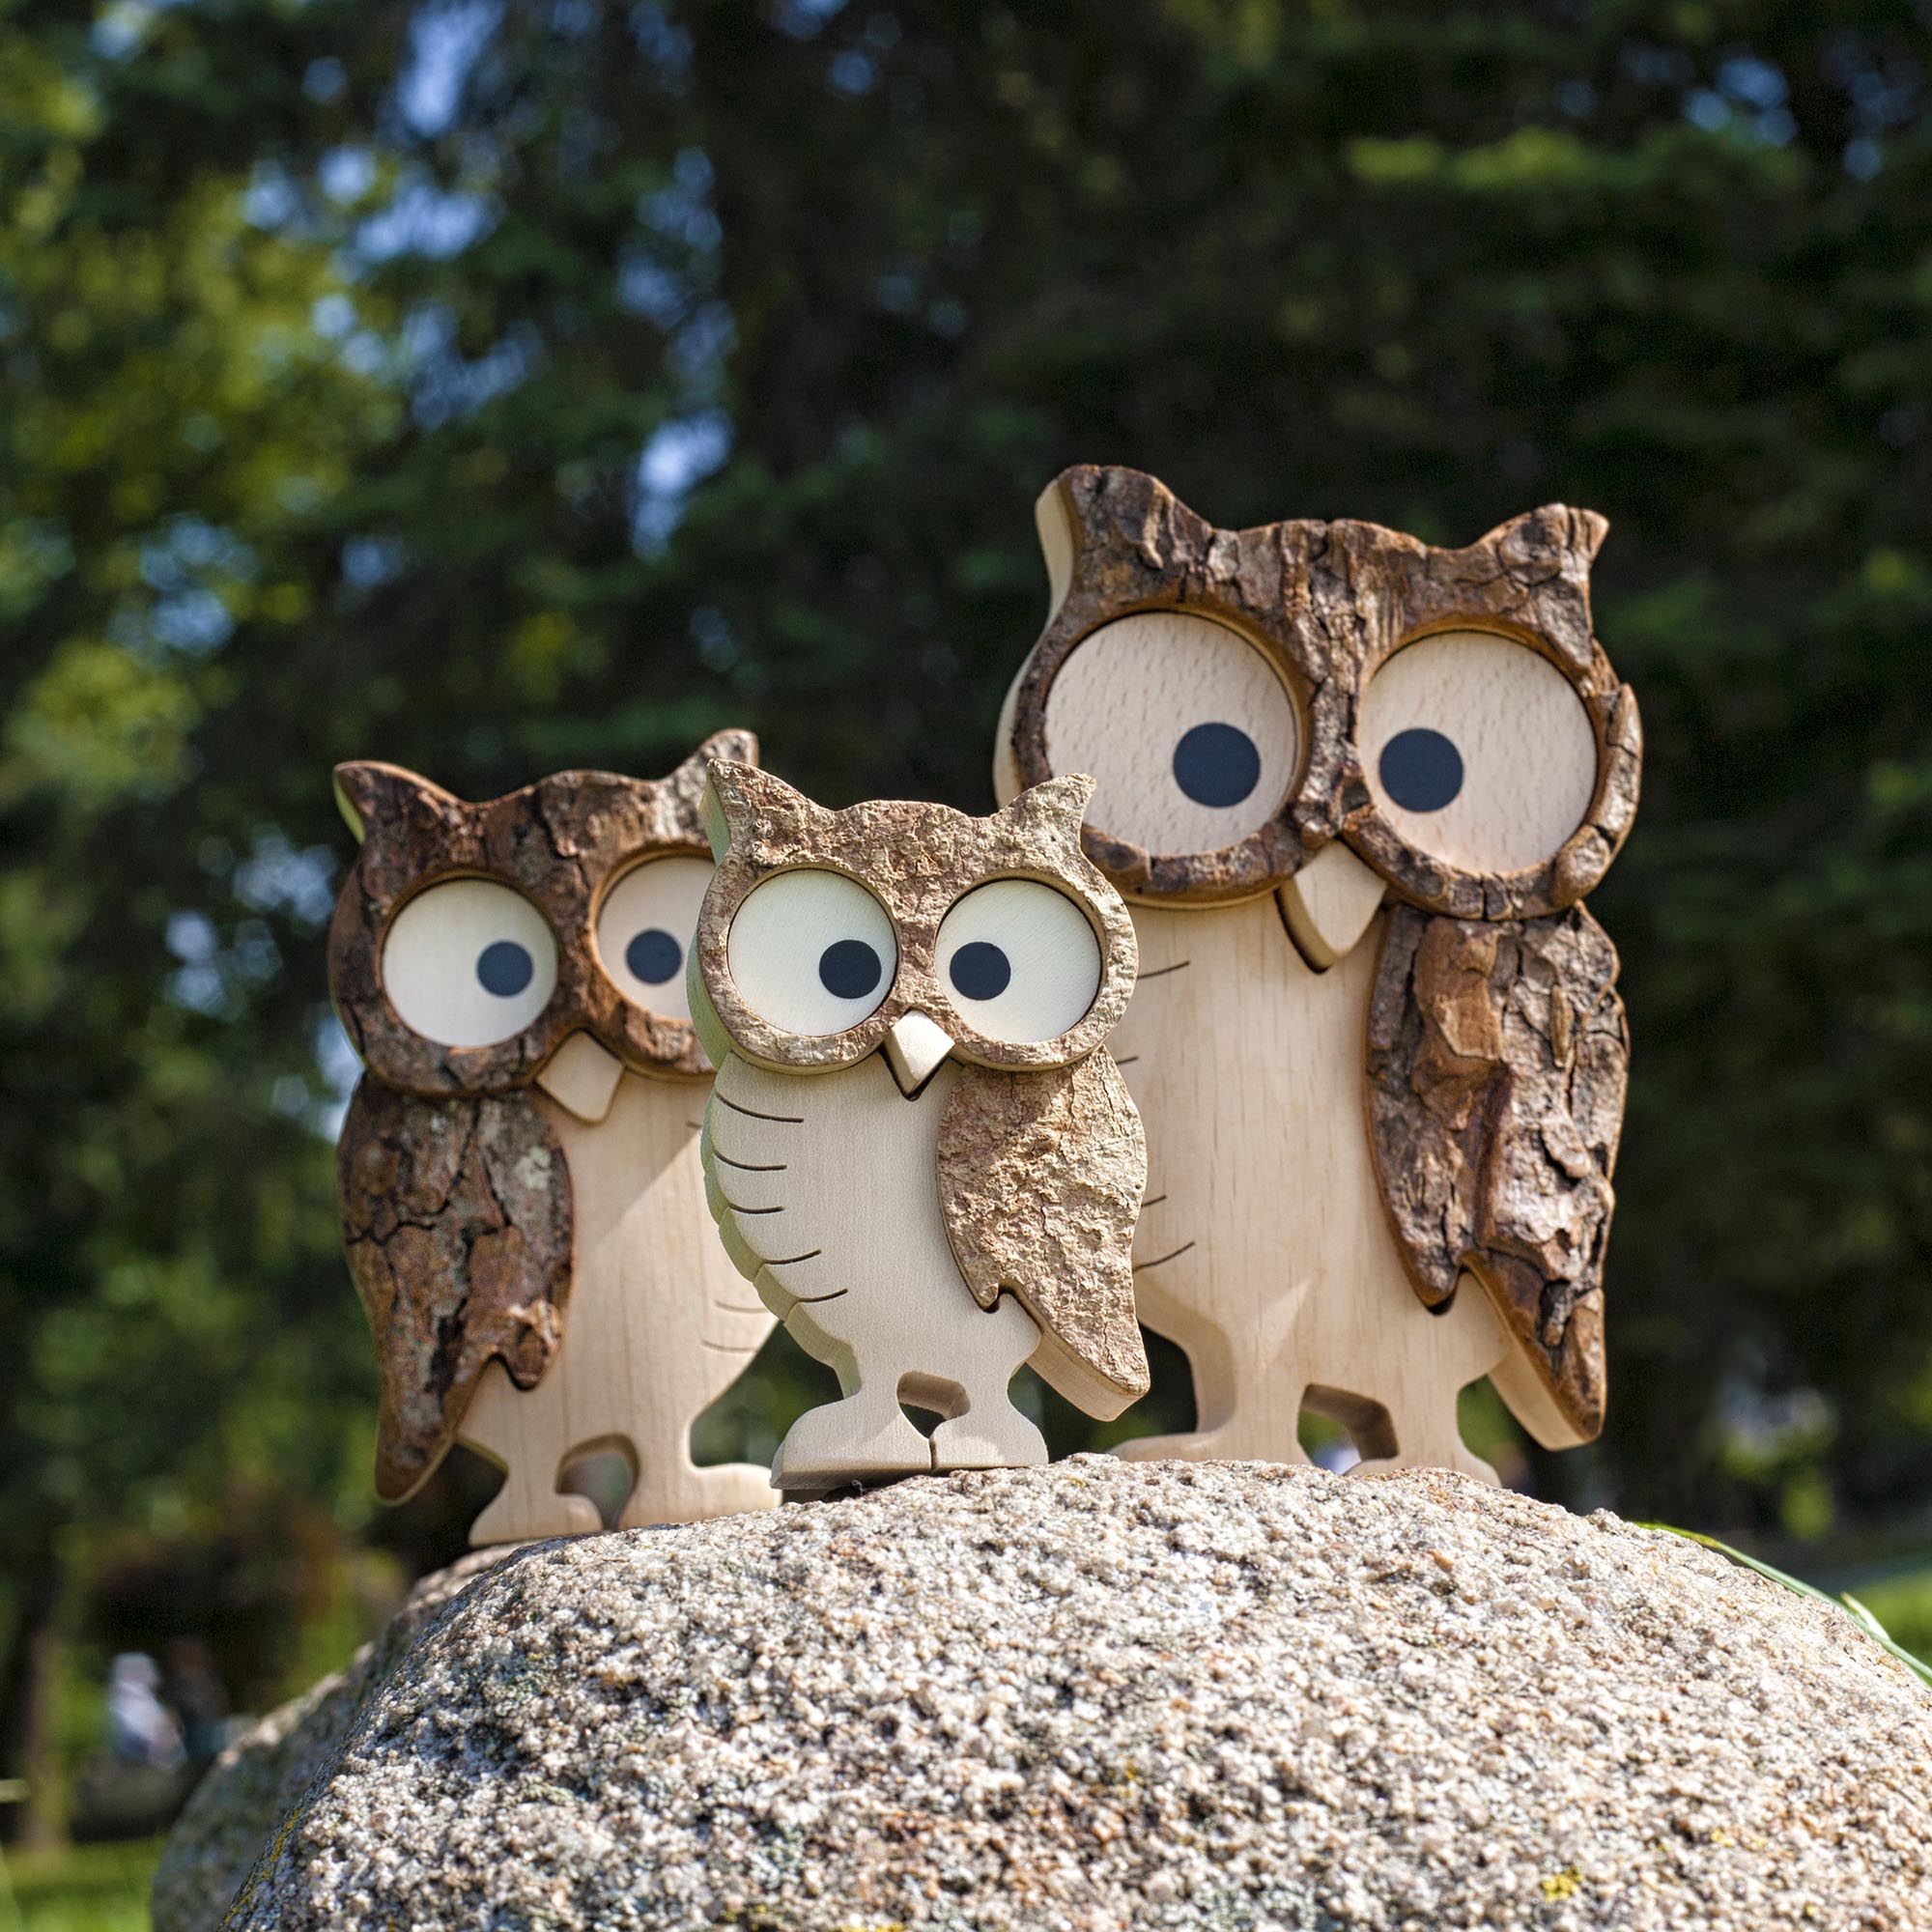 Amazon.com: DiliComing Outdoor Garden-Decor Owl Gifts - Solar Resin Owl  with Succulents LED Lights to Scare Birds Away, Outdoor Owl Sculpture Gift  for Mom, Women, Birthday and Christmas and Thanksgiving : Tools